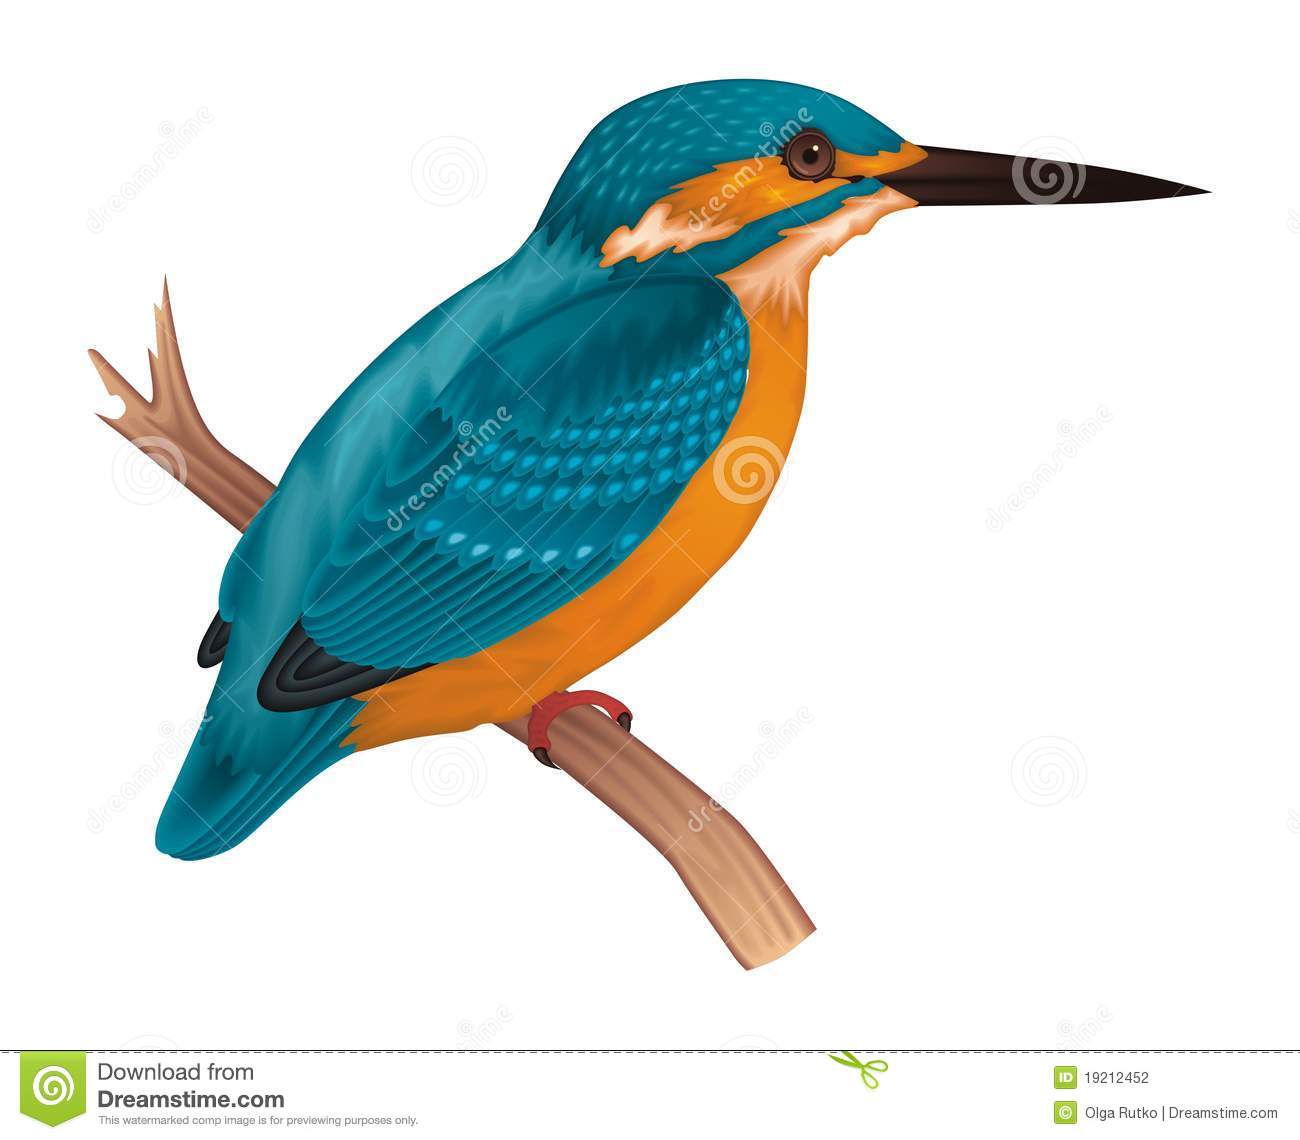 Kingfisher svg #13, Download drawings